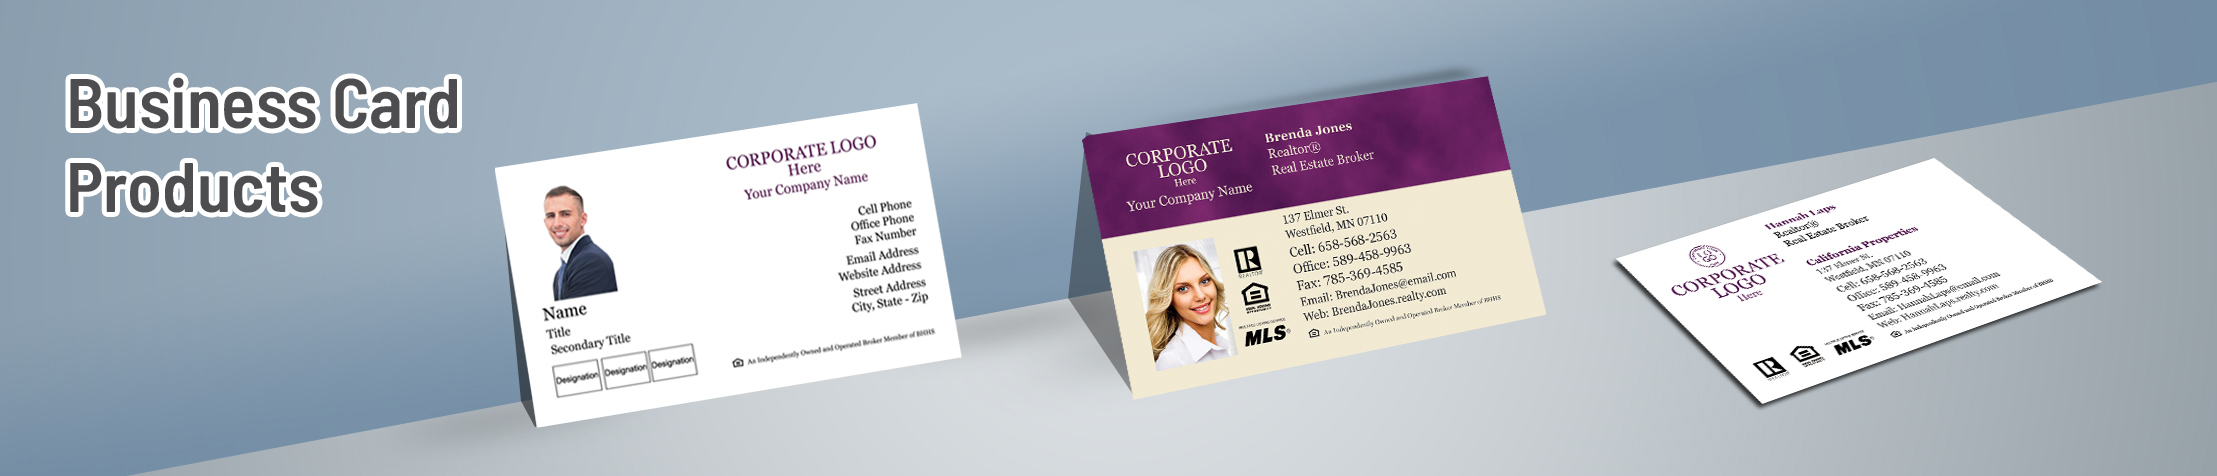 Berkshire Hathaway Real Estate Business Card Products - Unique, Custom Business Cards Printed on Quality Stock with Creative Designs for Realtors | Sparkprint.com